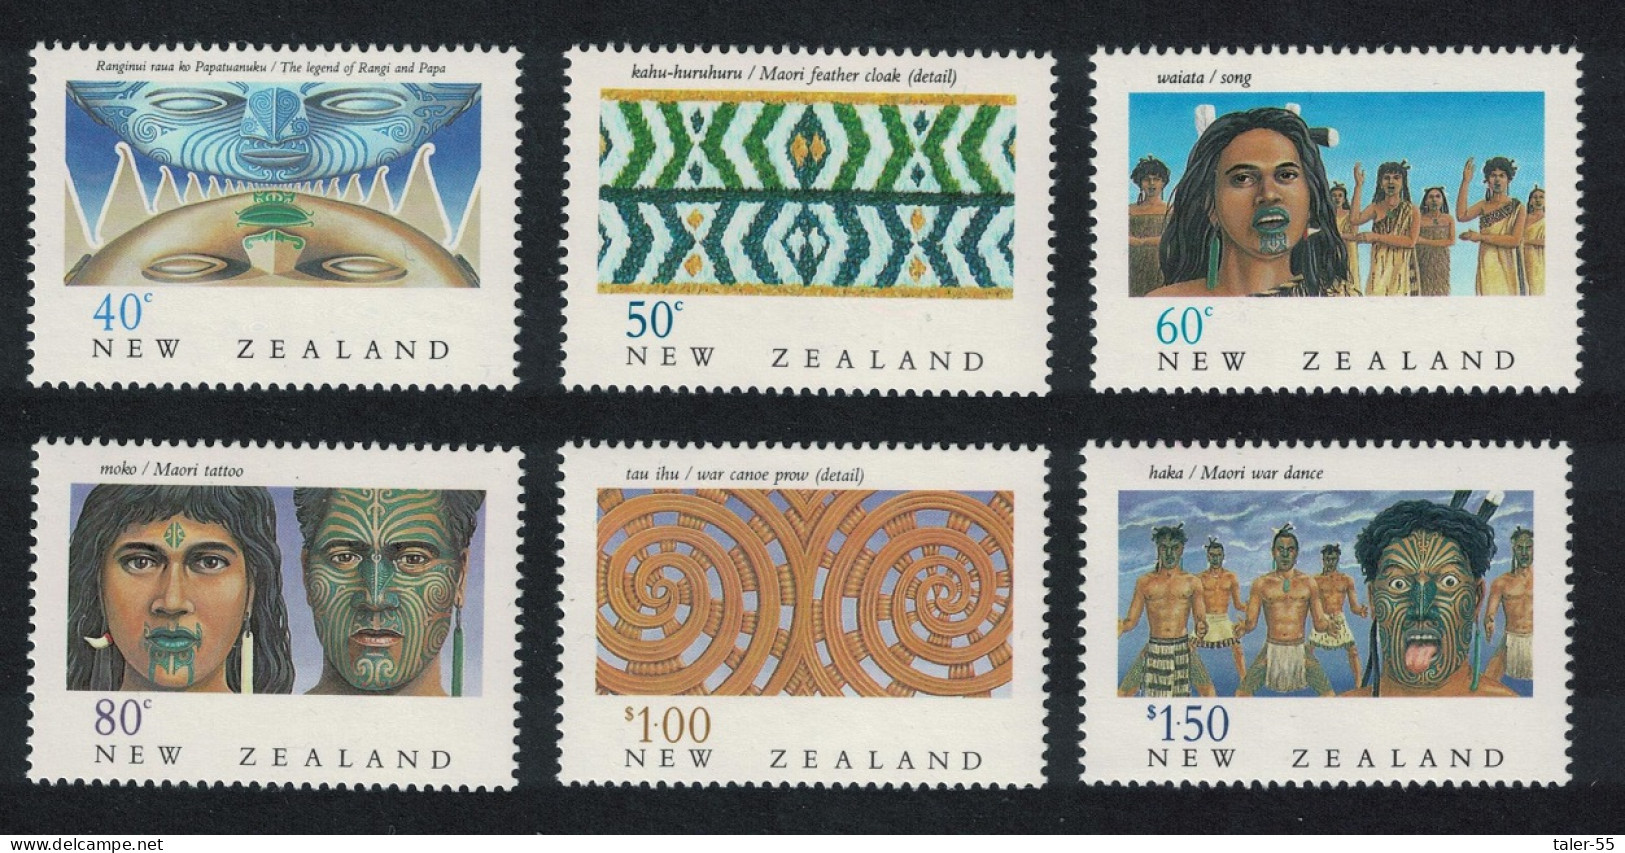 New Zealand Heritage 6th Issue The Maori 6v 1990 MNH SG#1562-1567 - Neufs